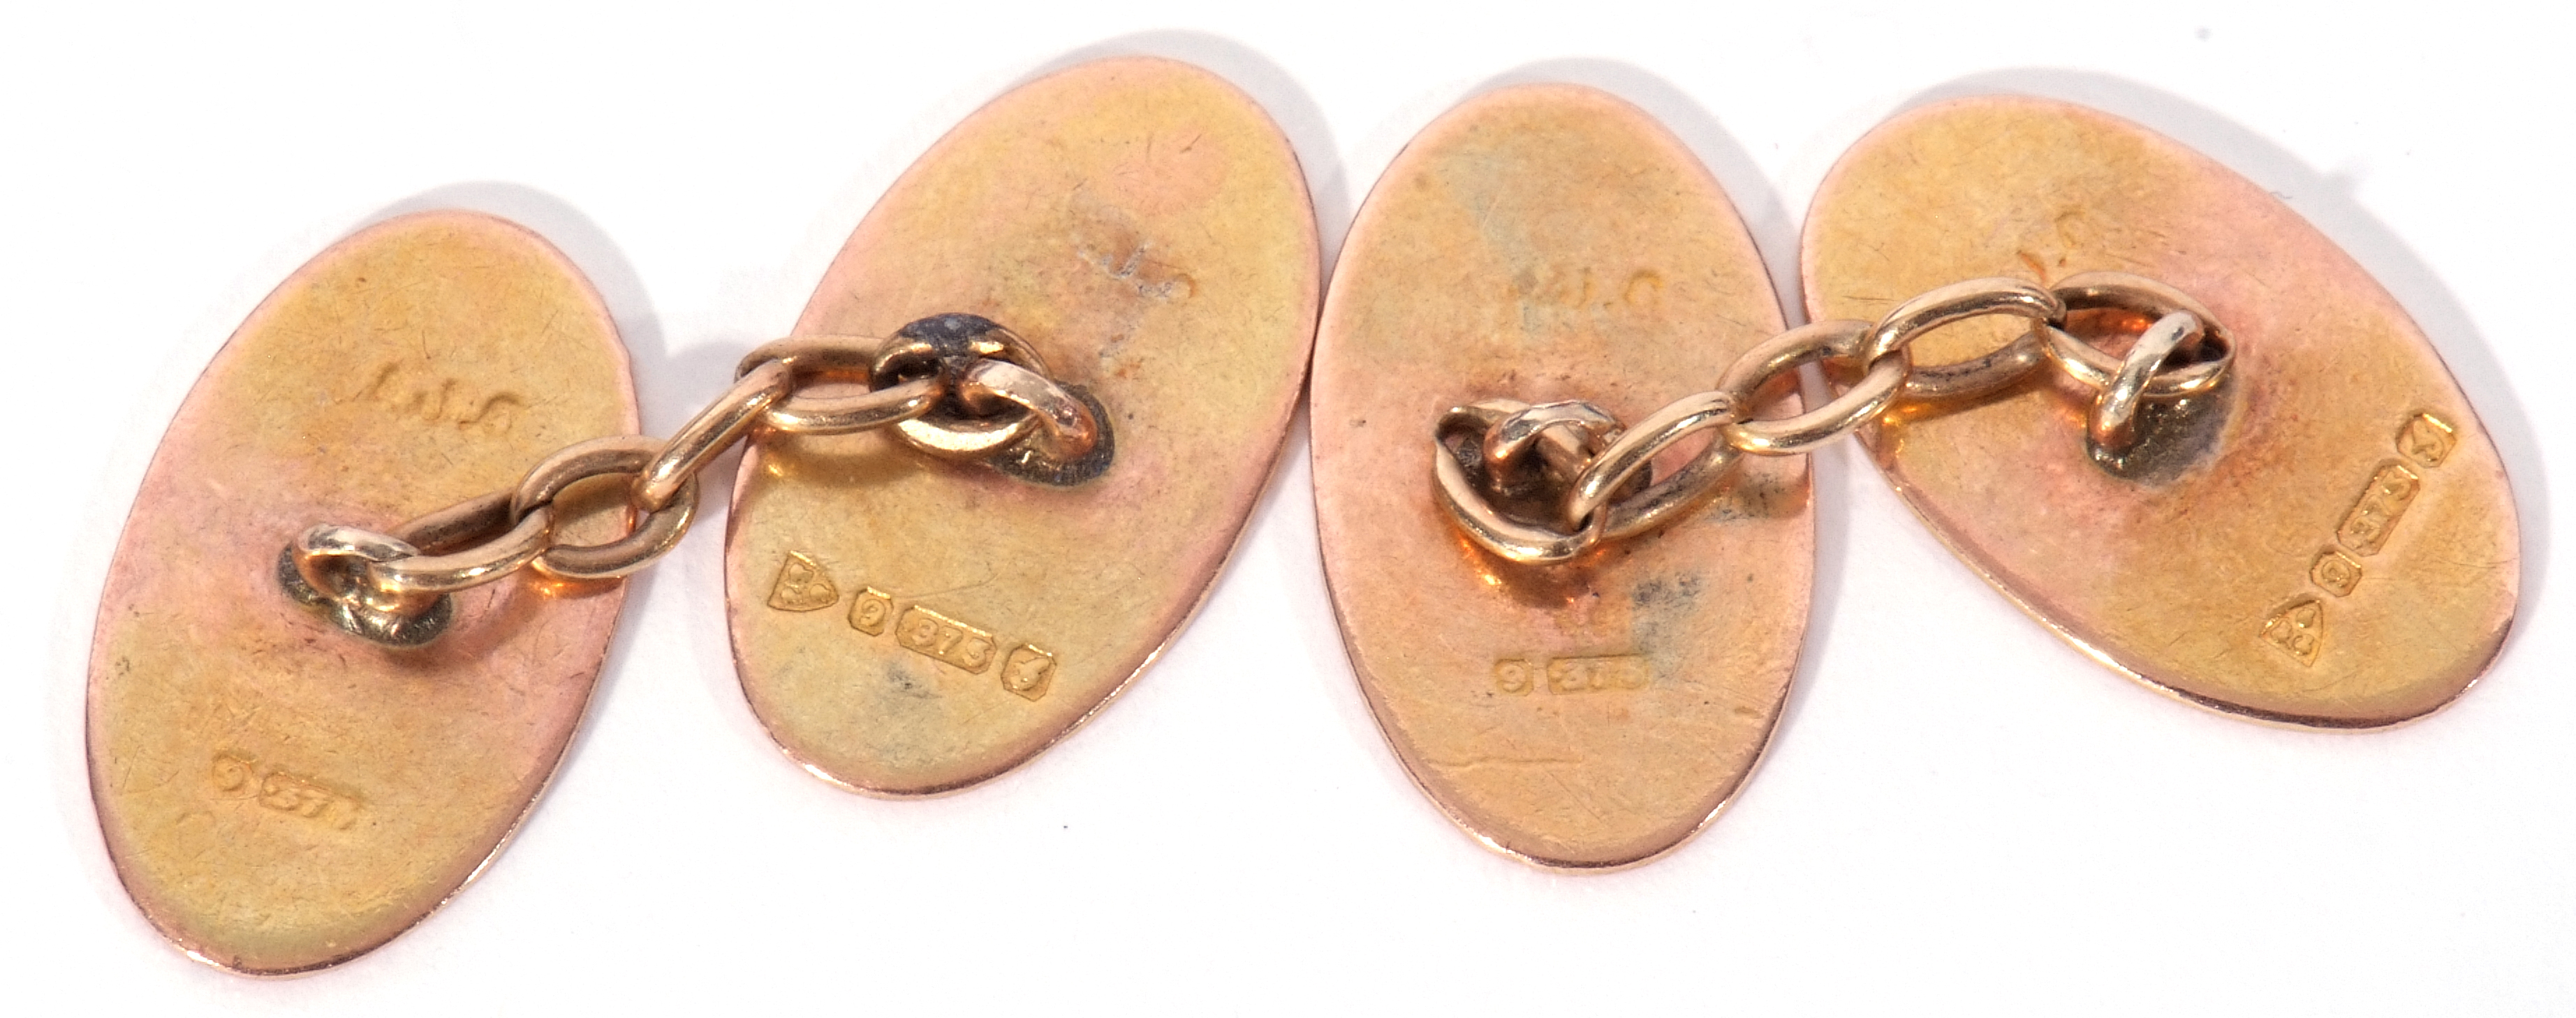 Pair of 9ct gold cuff links, oval shaped, each panel engraved with a monogram, chain connectors, - Image 3 of 3